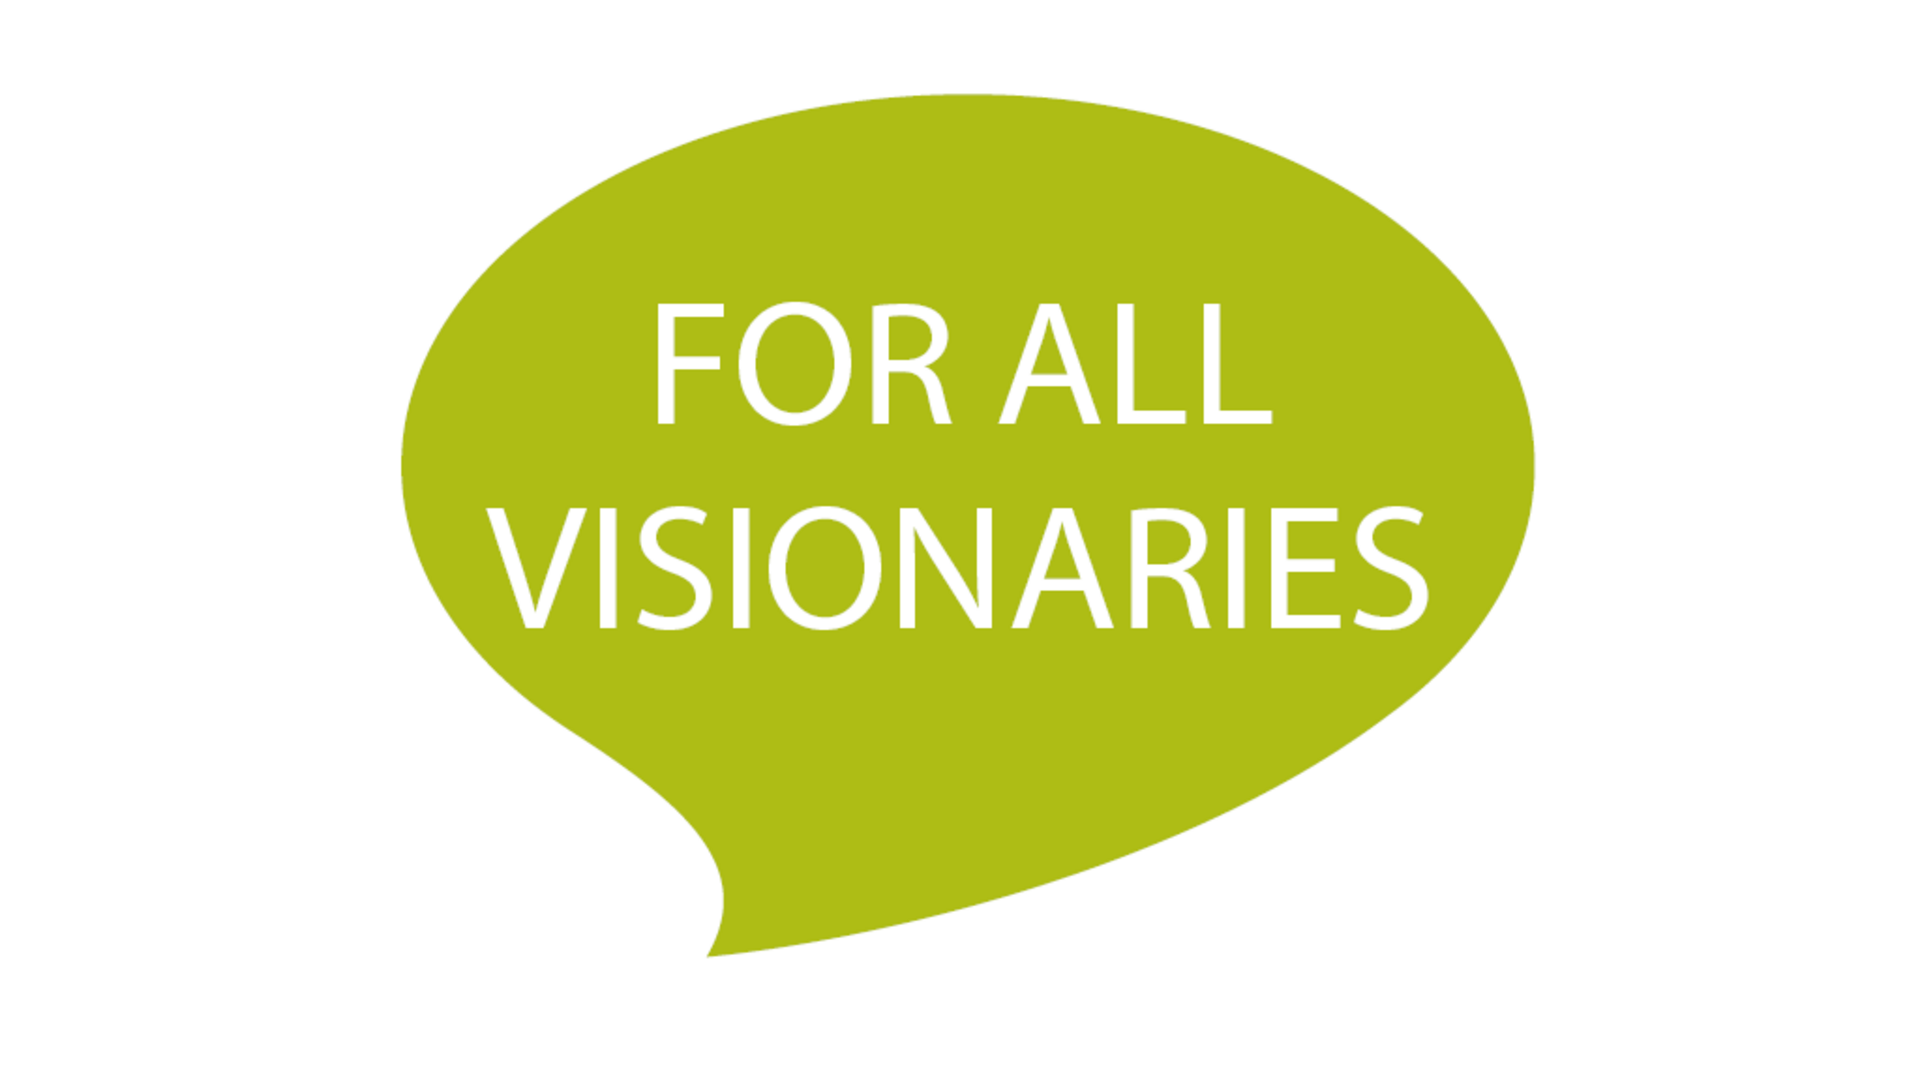 For all visionaries